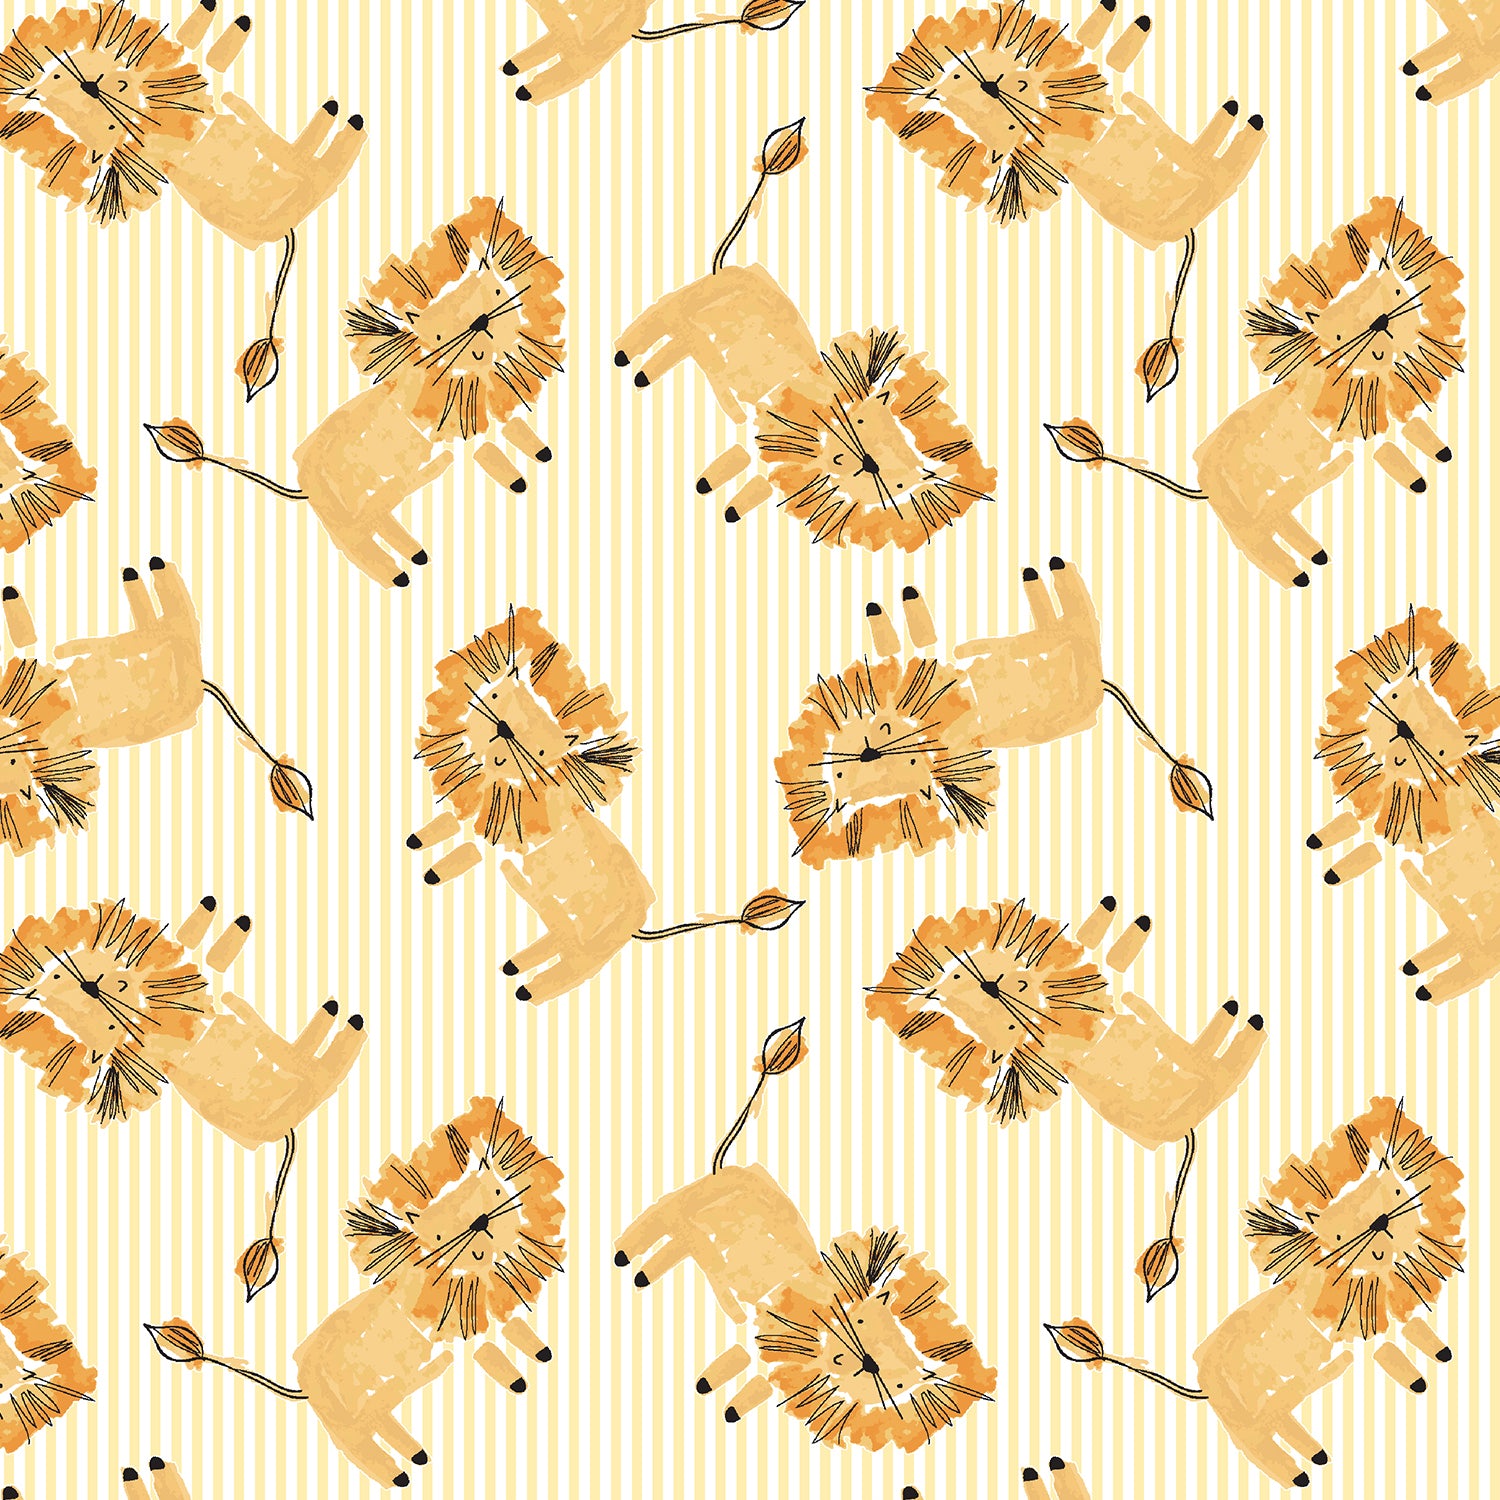 Wild Ones Quilt Fabric - Lion Pounce in Yellow - RJ4102-YE2